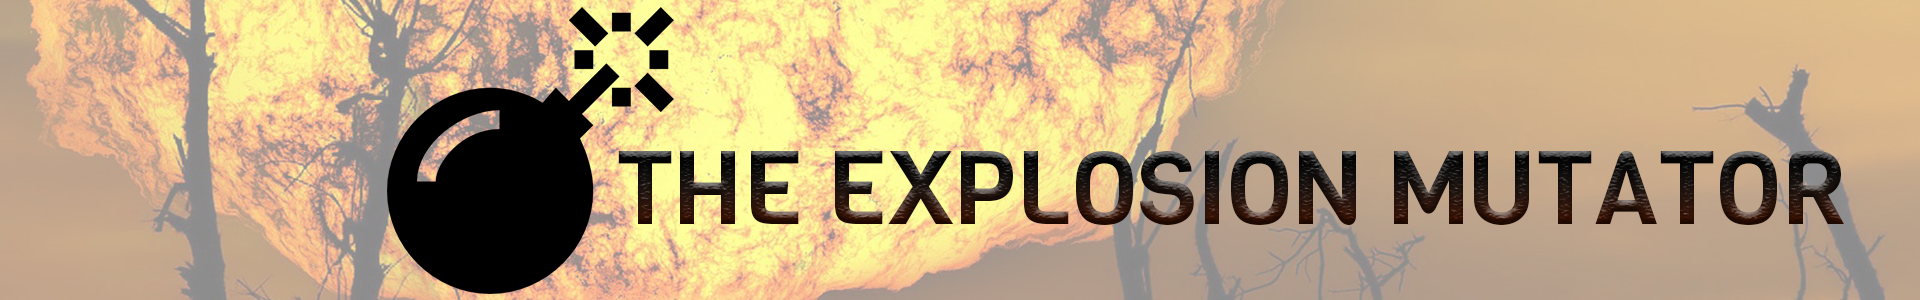 explosions banner